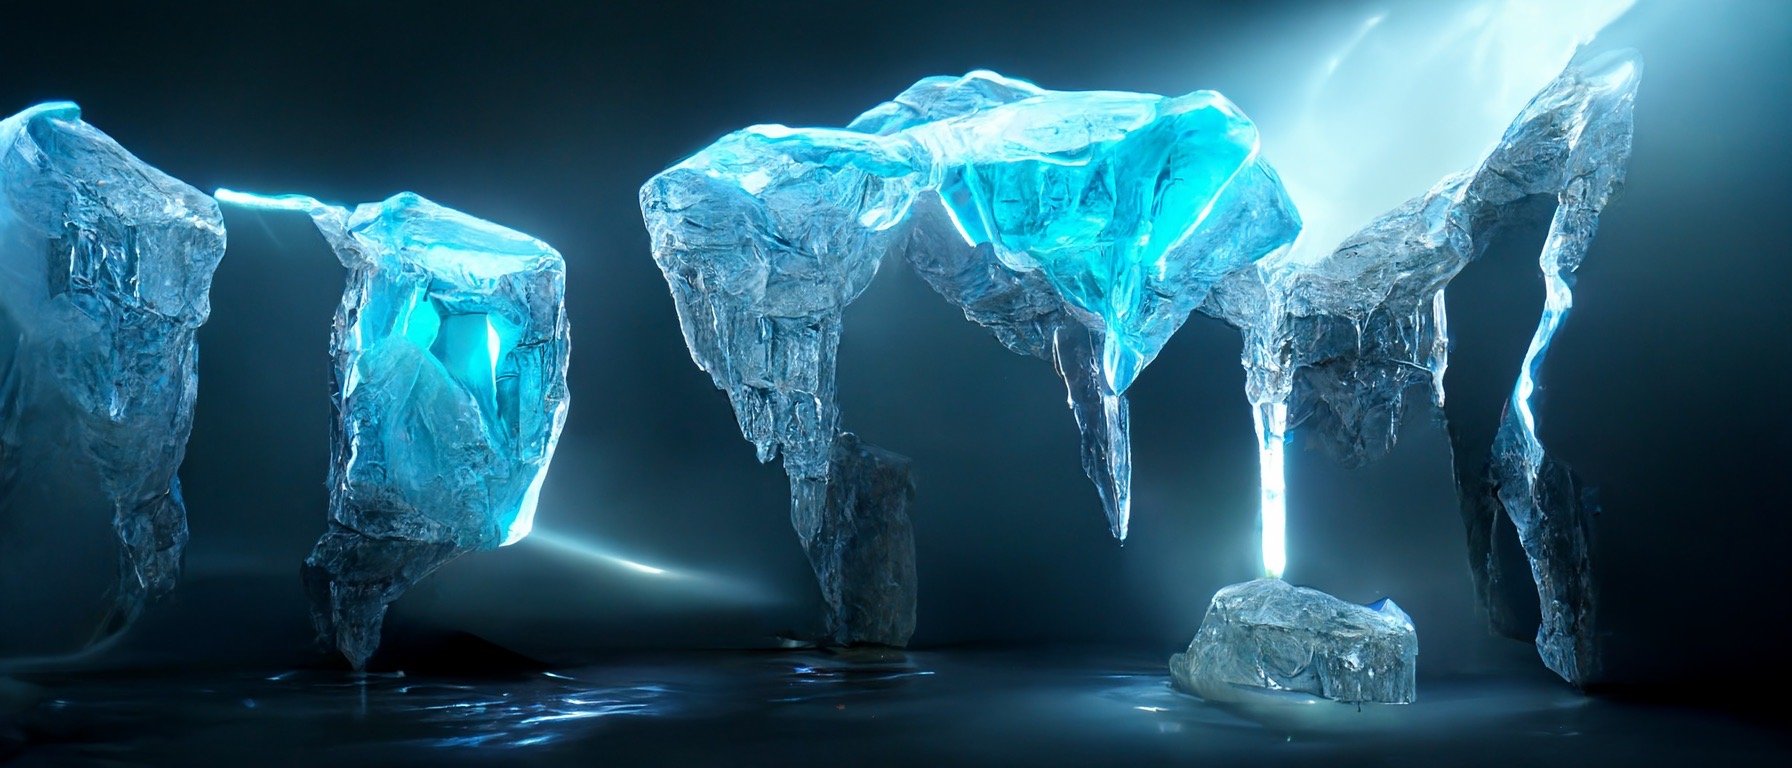 8f49a96a-d31a-4447-afcf-e1bda5fe060d_S3RAPH_httpss.mj.runmEEi2E__frozen_Trident_crystal_in_ice_cave_with_reflective._8k_cinematic_composition_re.JPG